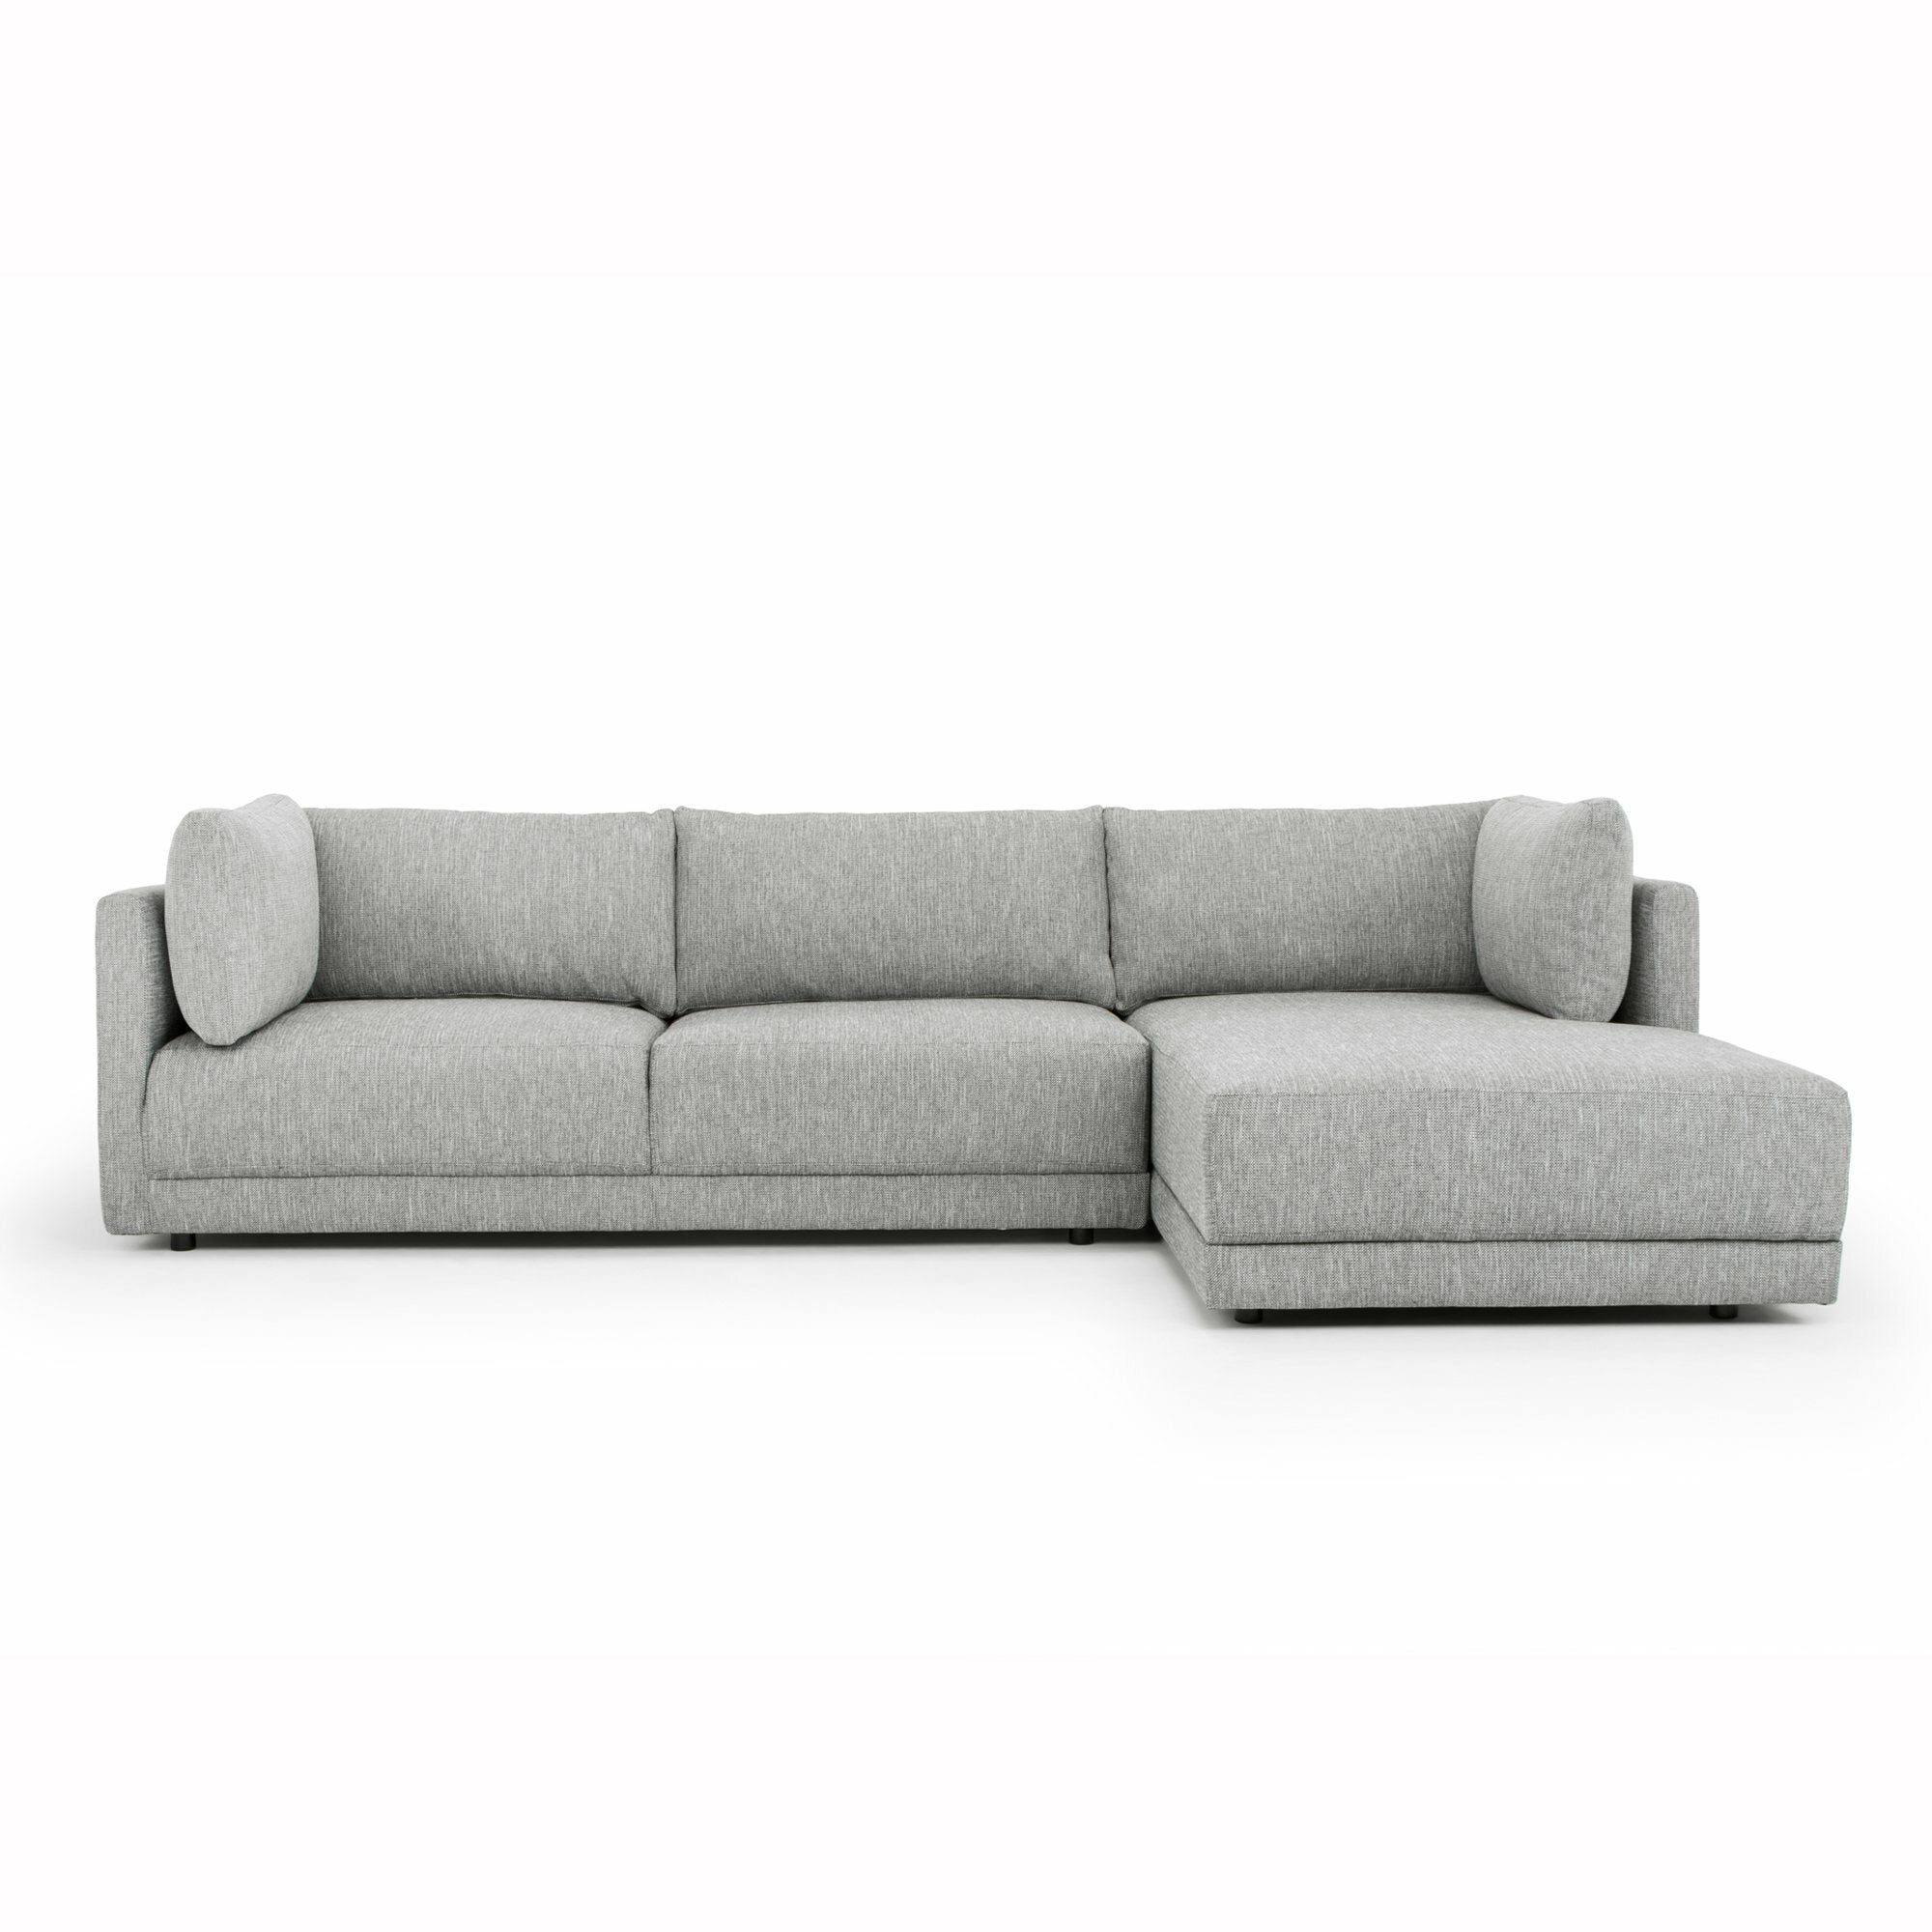 Kerry 3 Seater Right Chaise Fabric Sofa - Graphite Grey